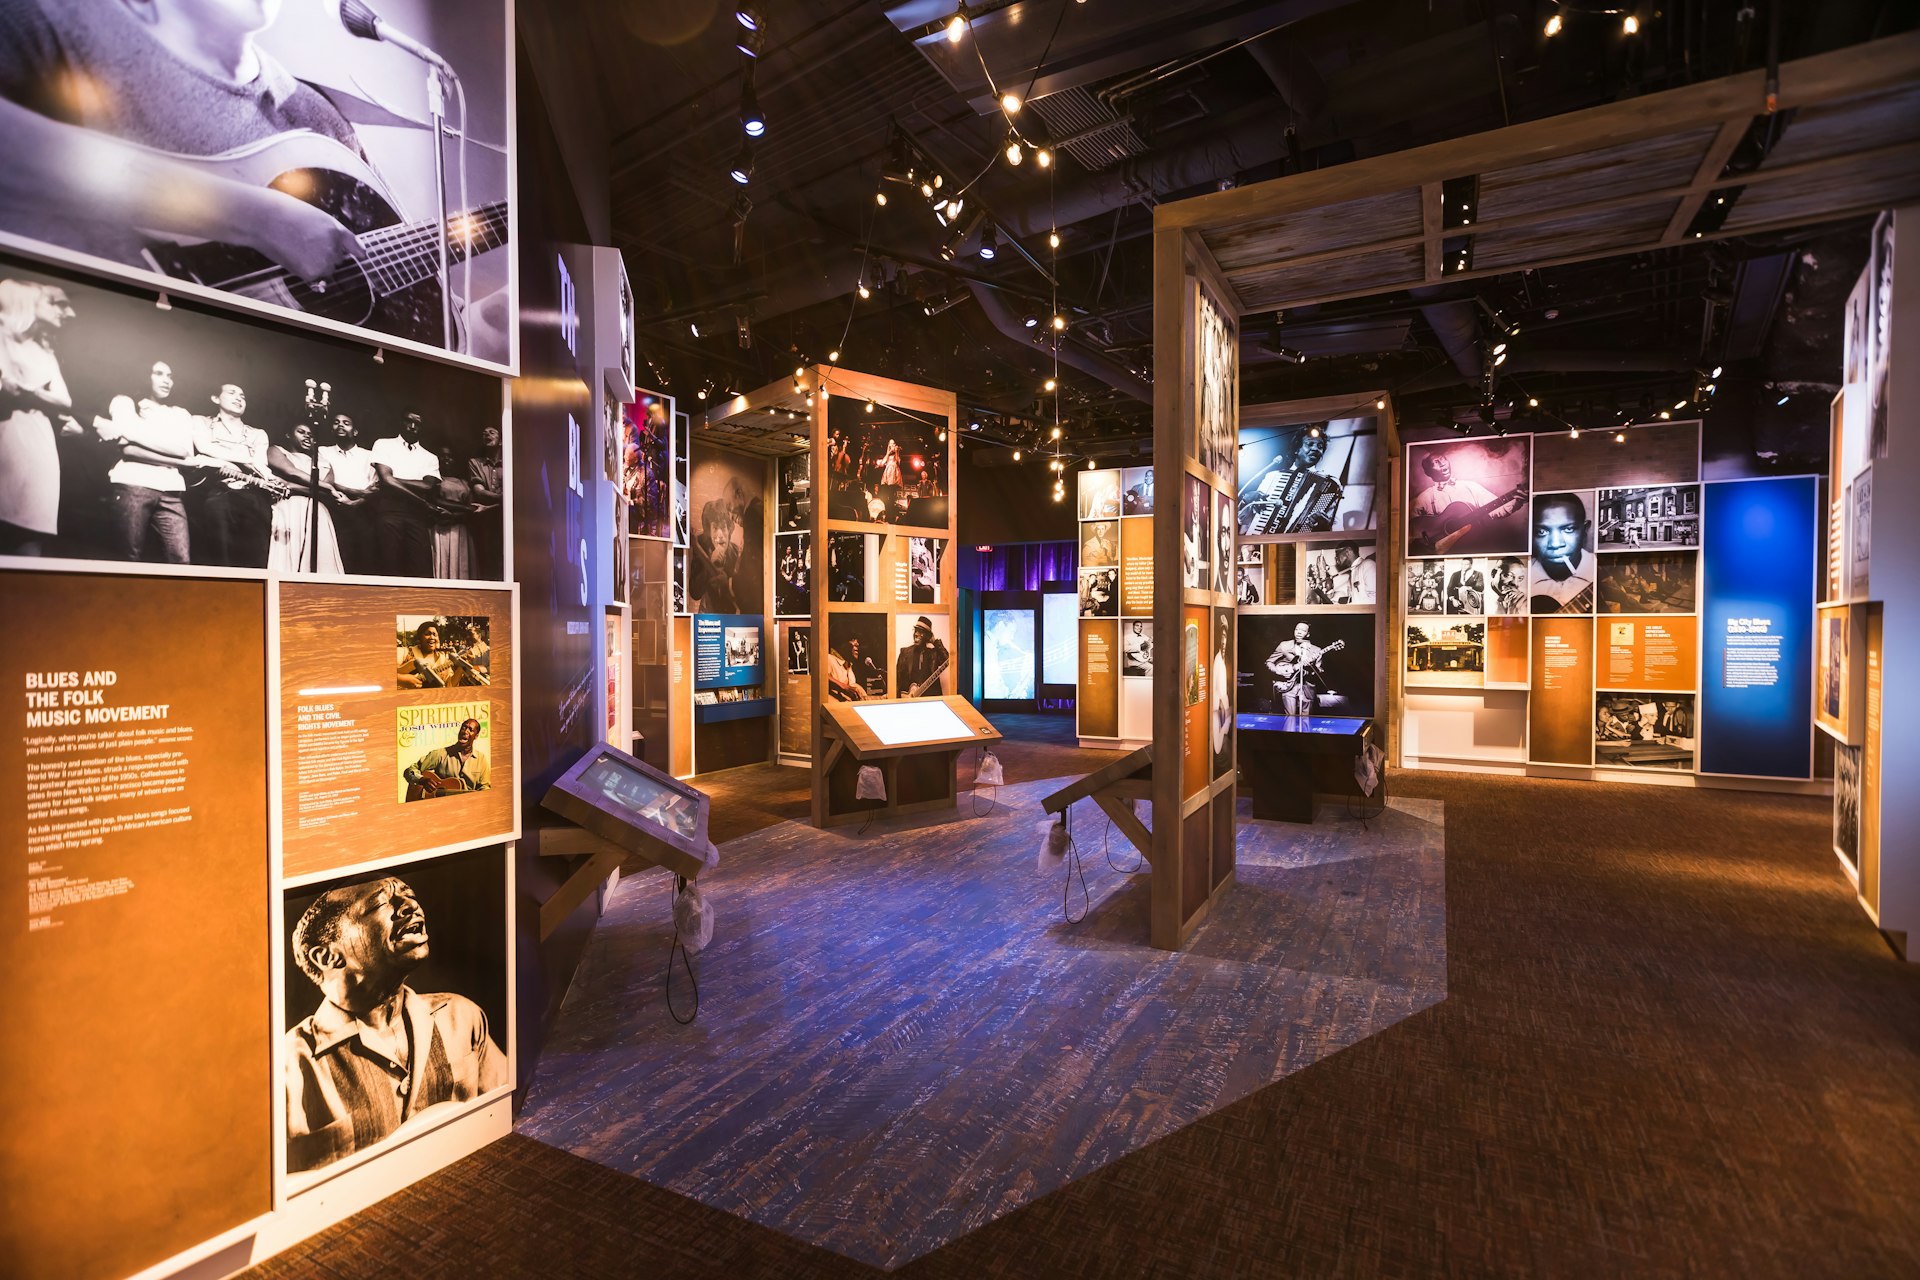 Inside a museum exhibit dedicated to Black music history